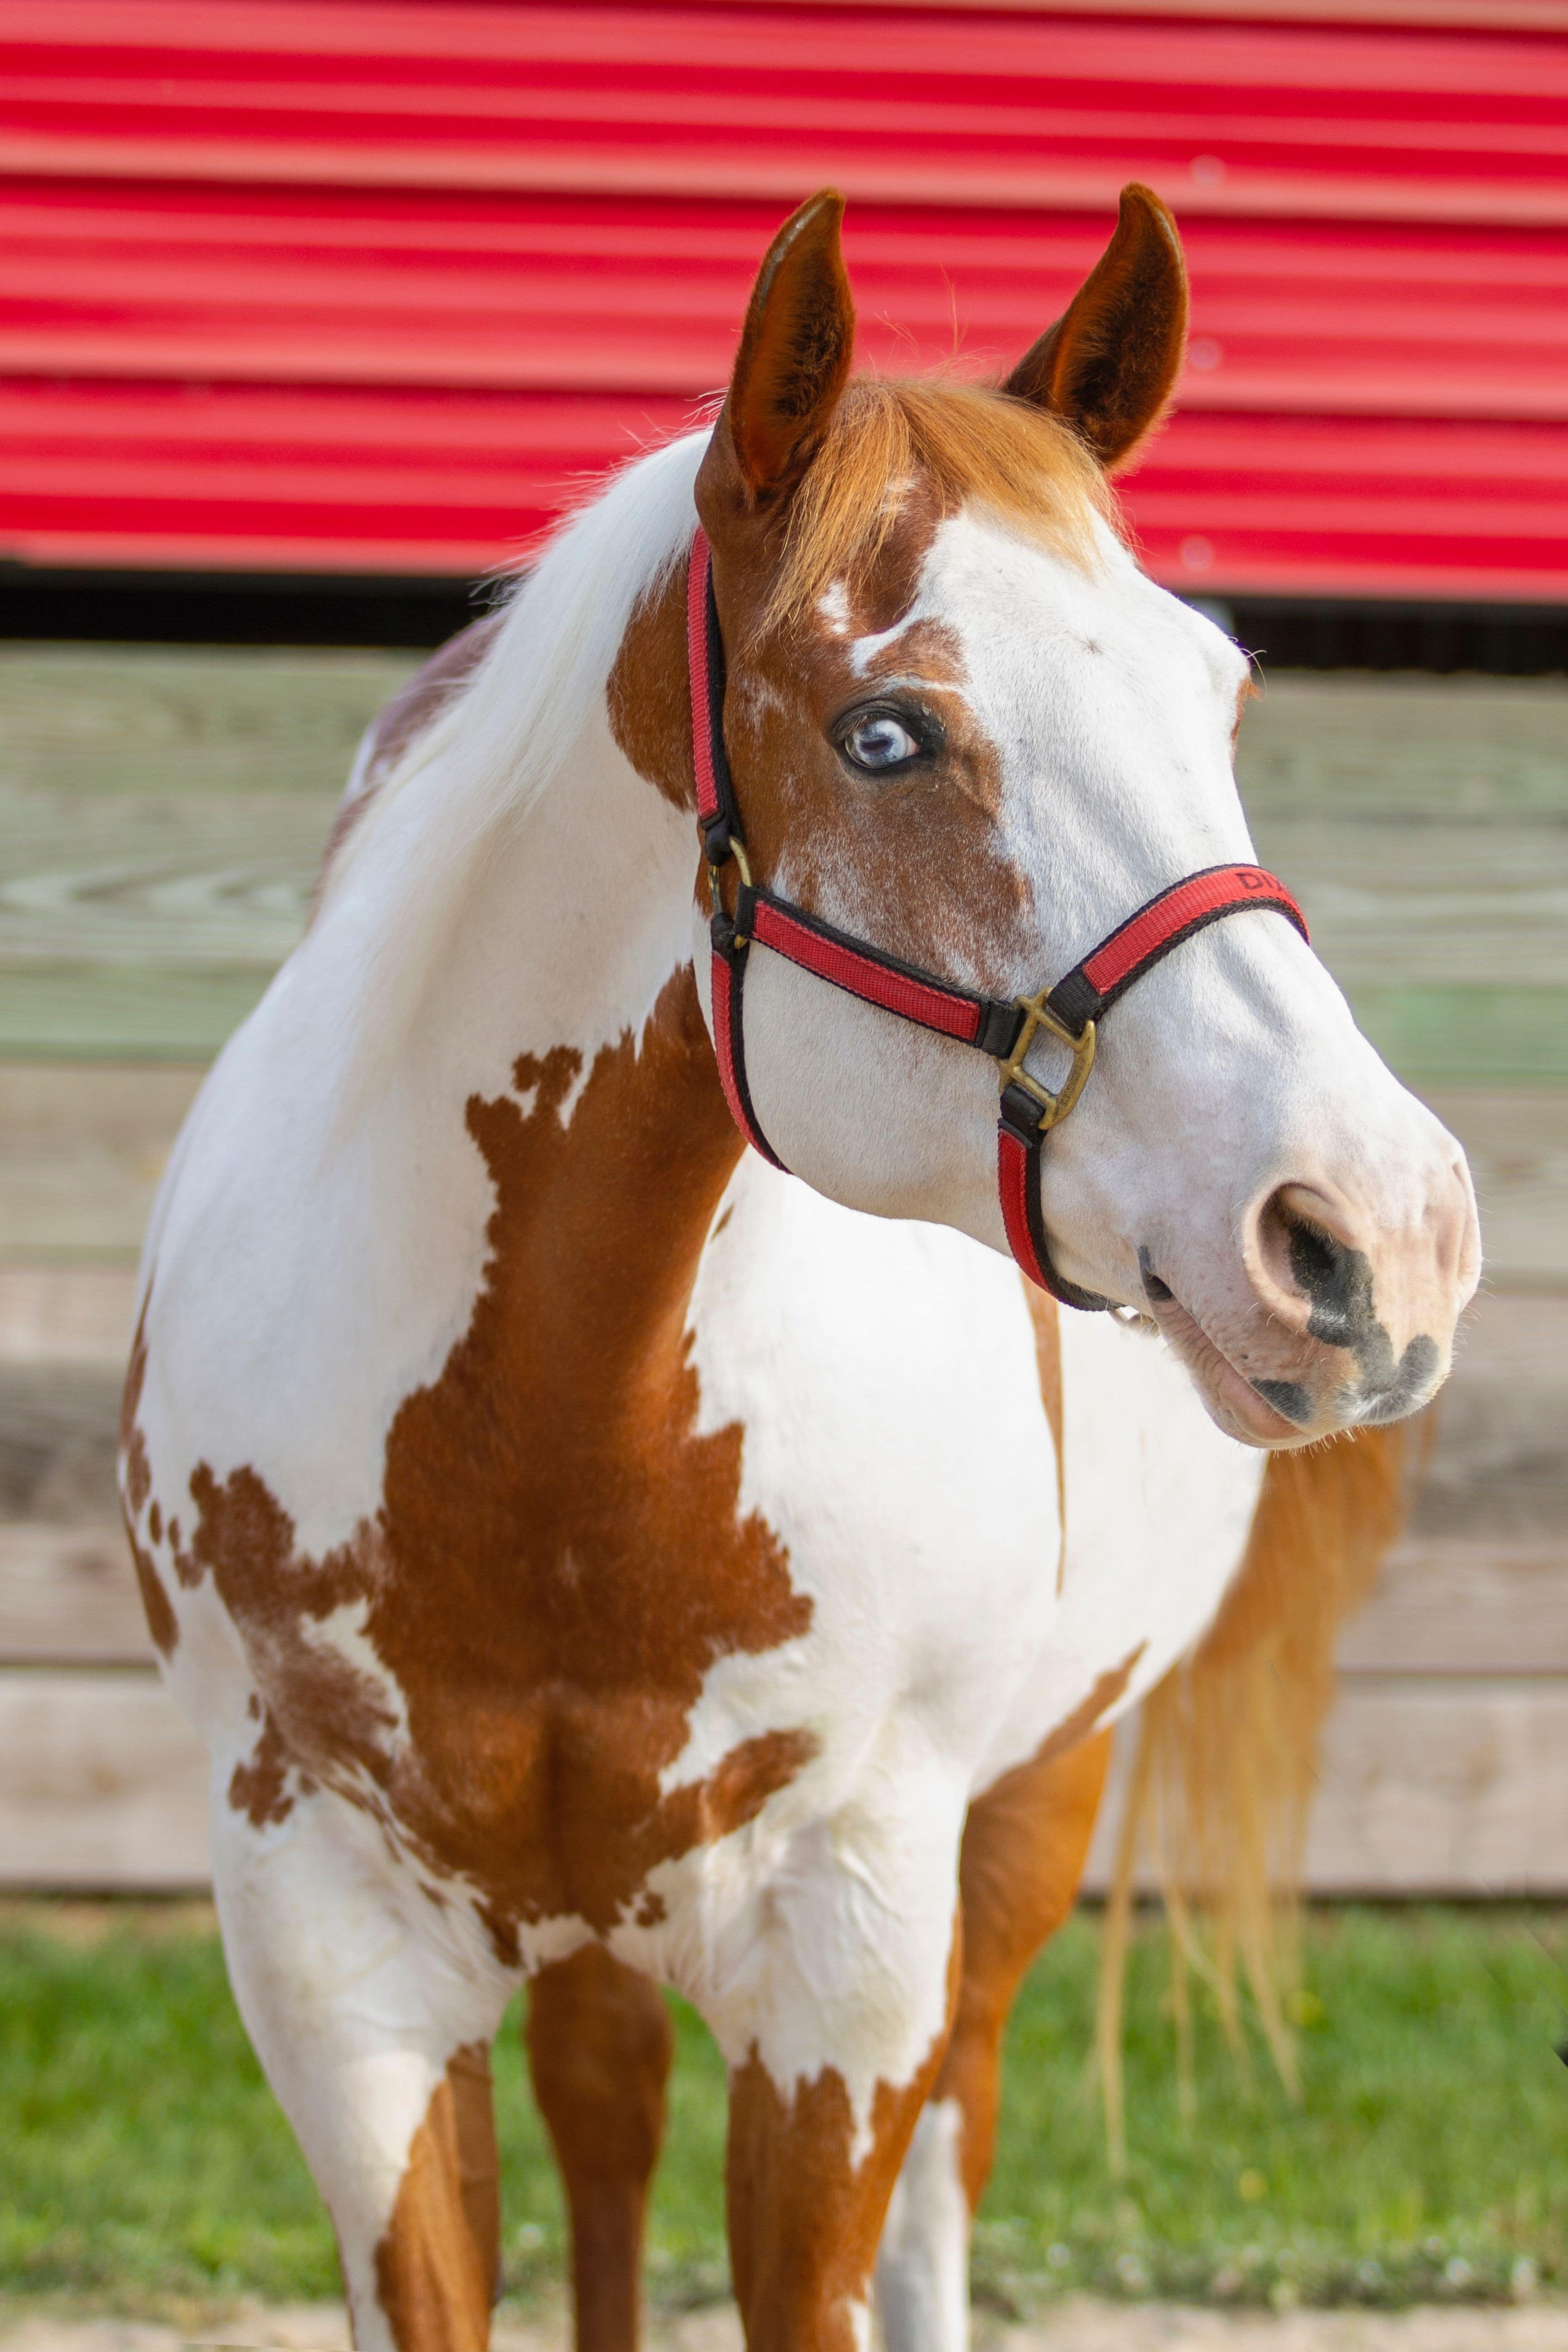 Dixie is a lesson horse at J & S Performance Horses. She is a sorrel and white paint mare with two blue eyes wearing a red and black halter with her name on it.